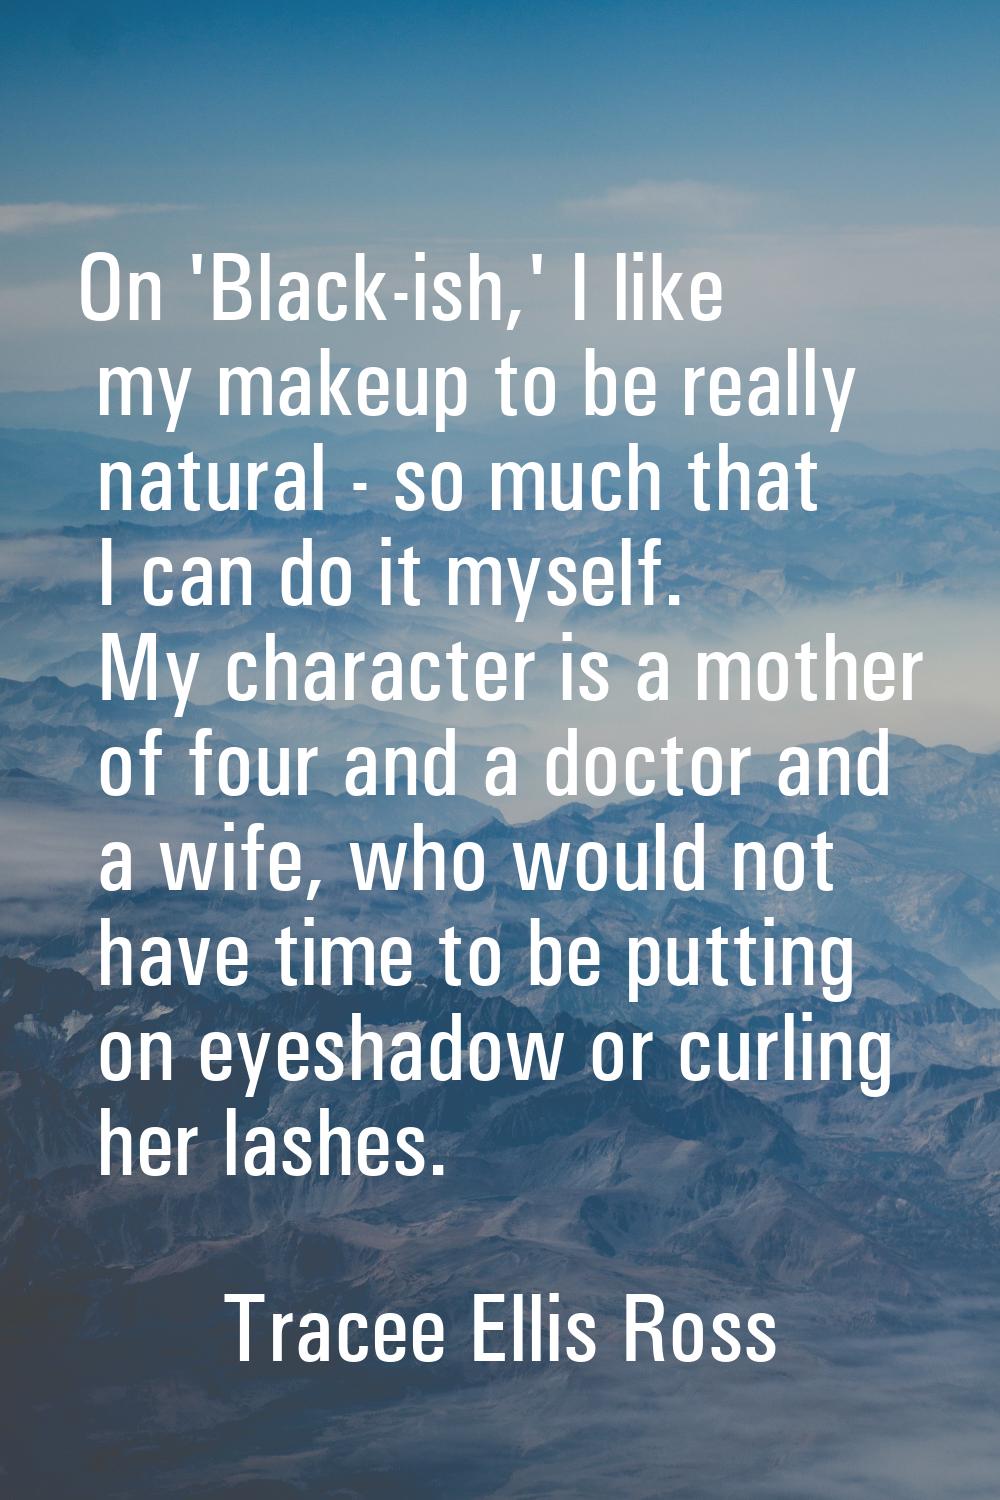 On 'Black-ish,' I like my makeup to be really natural - so much that I can do it myself. My charact